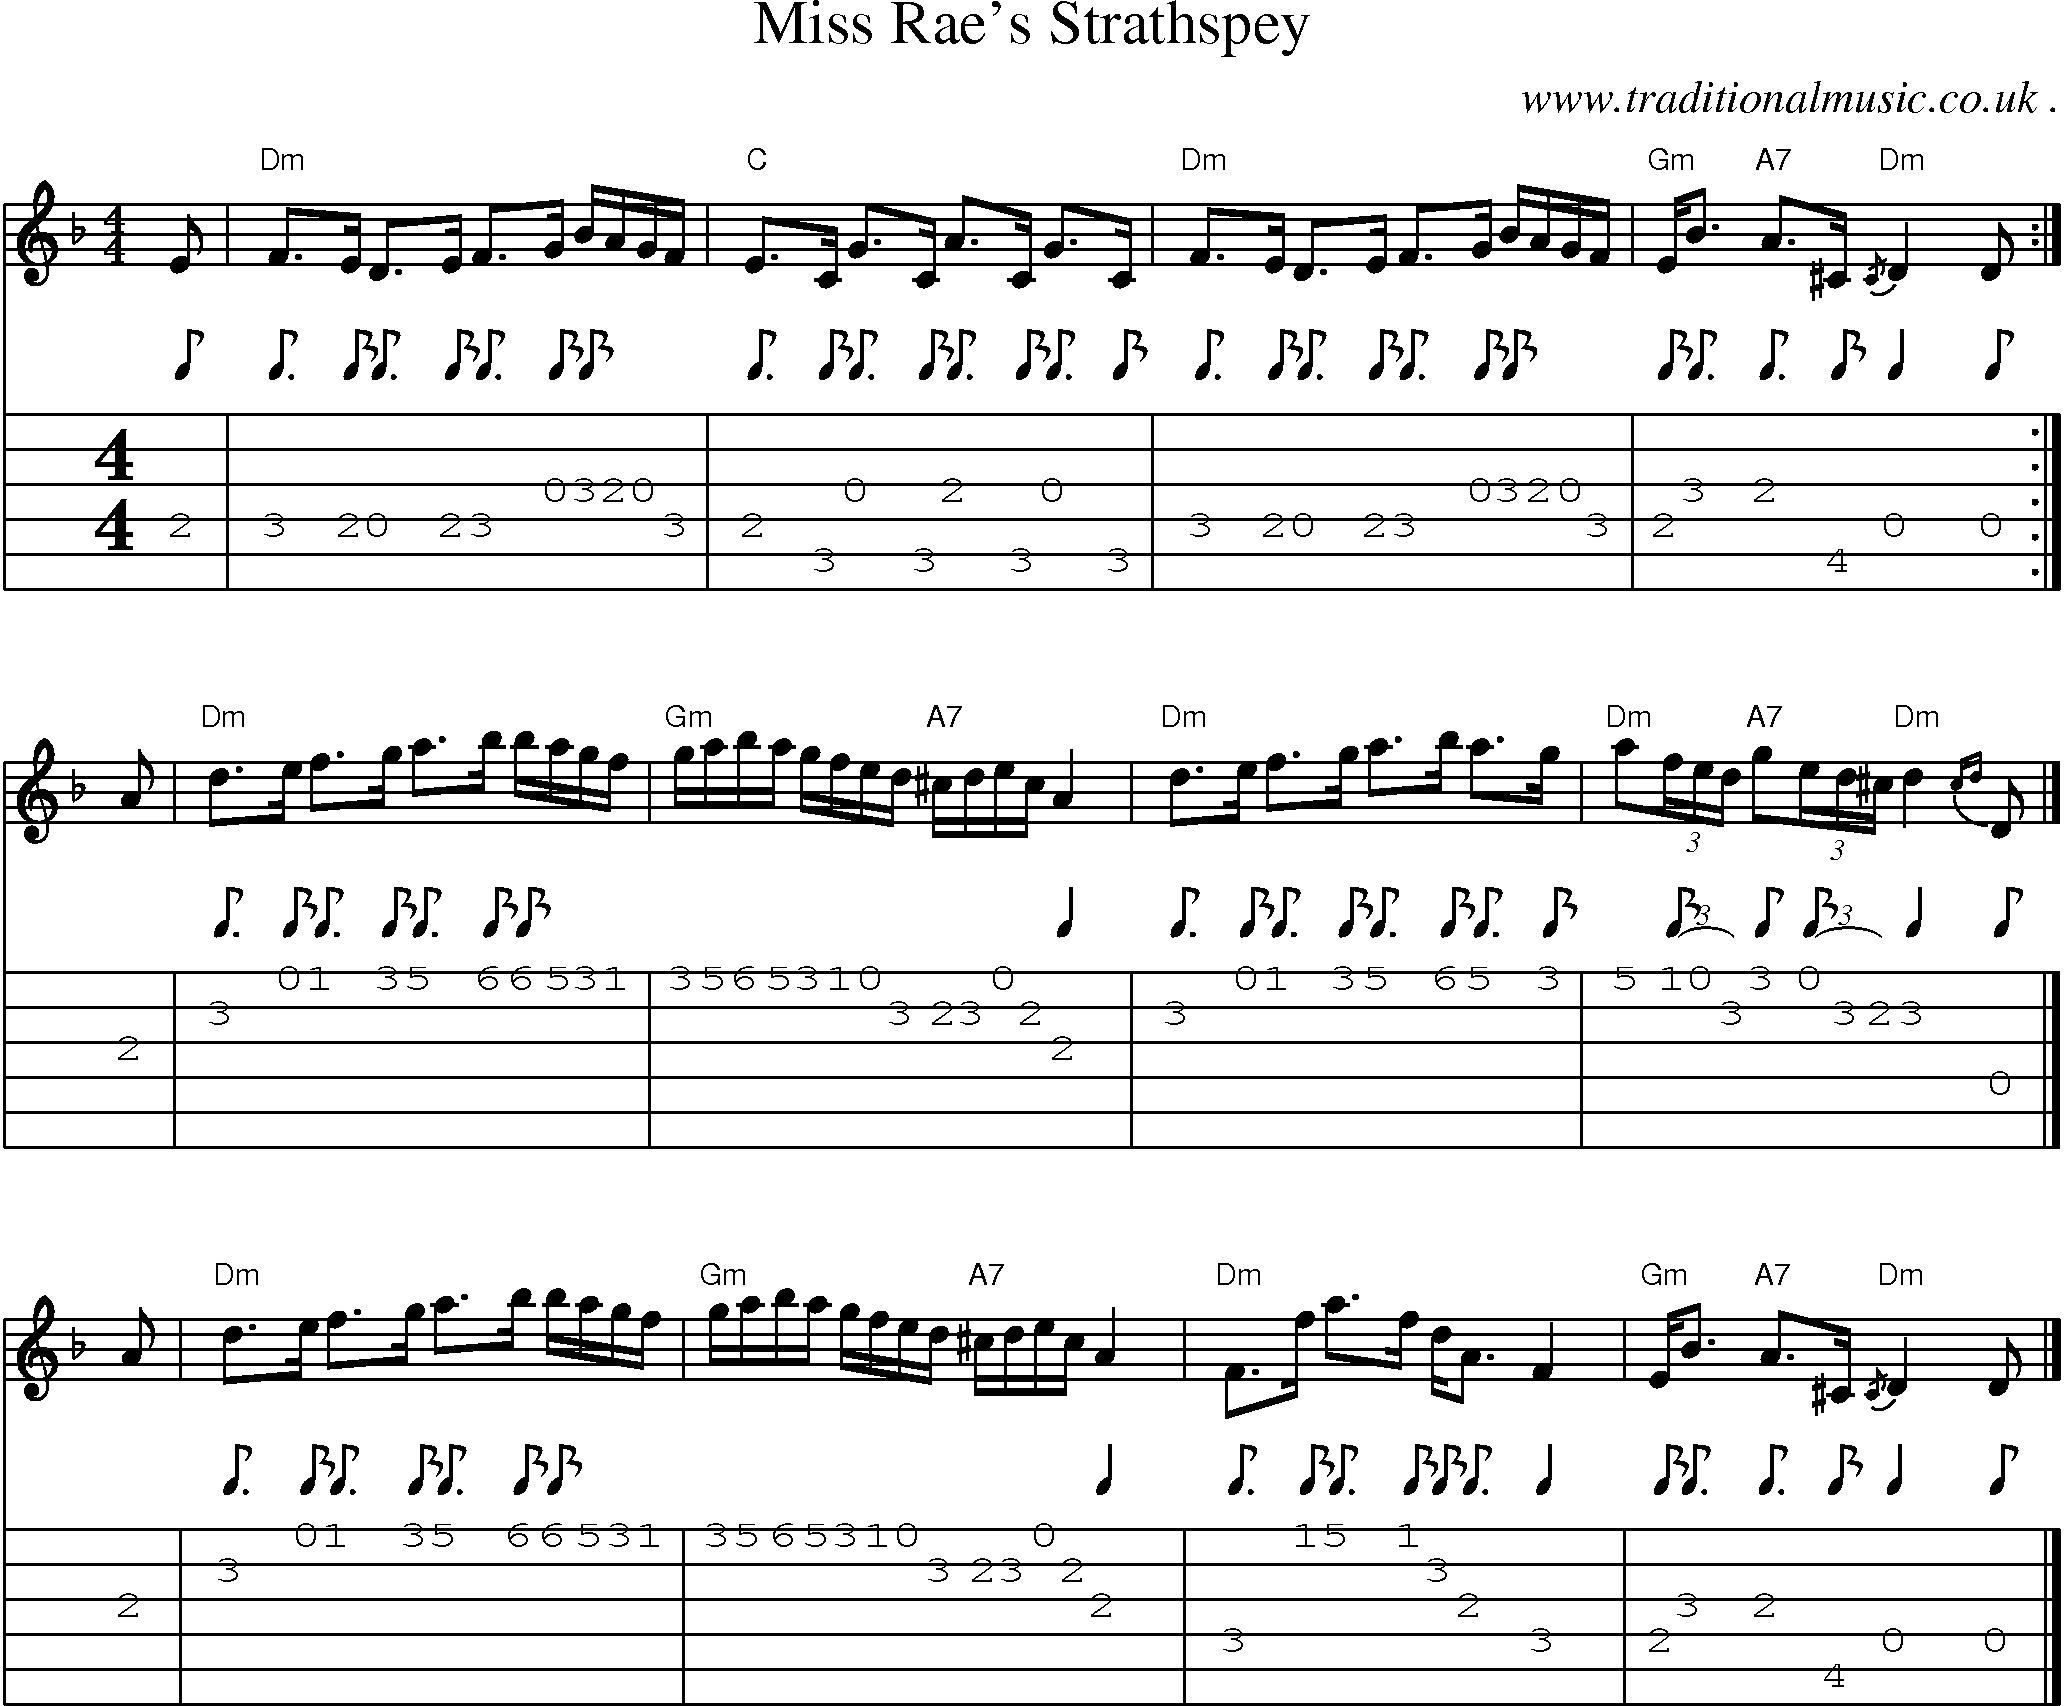 Sheet-music  score, Chords and Guitar Tabs for Miss Raes Strathspey